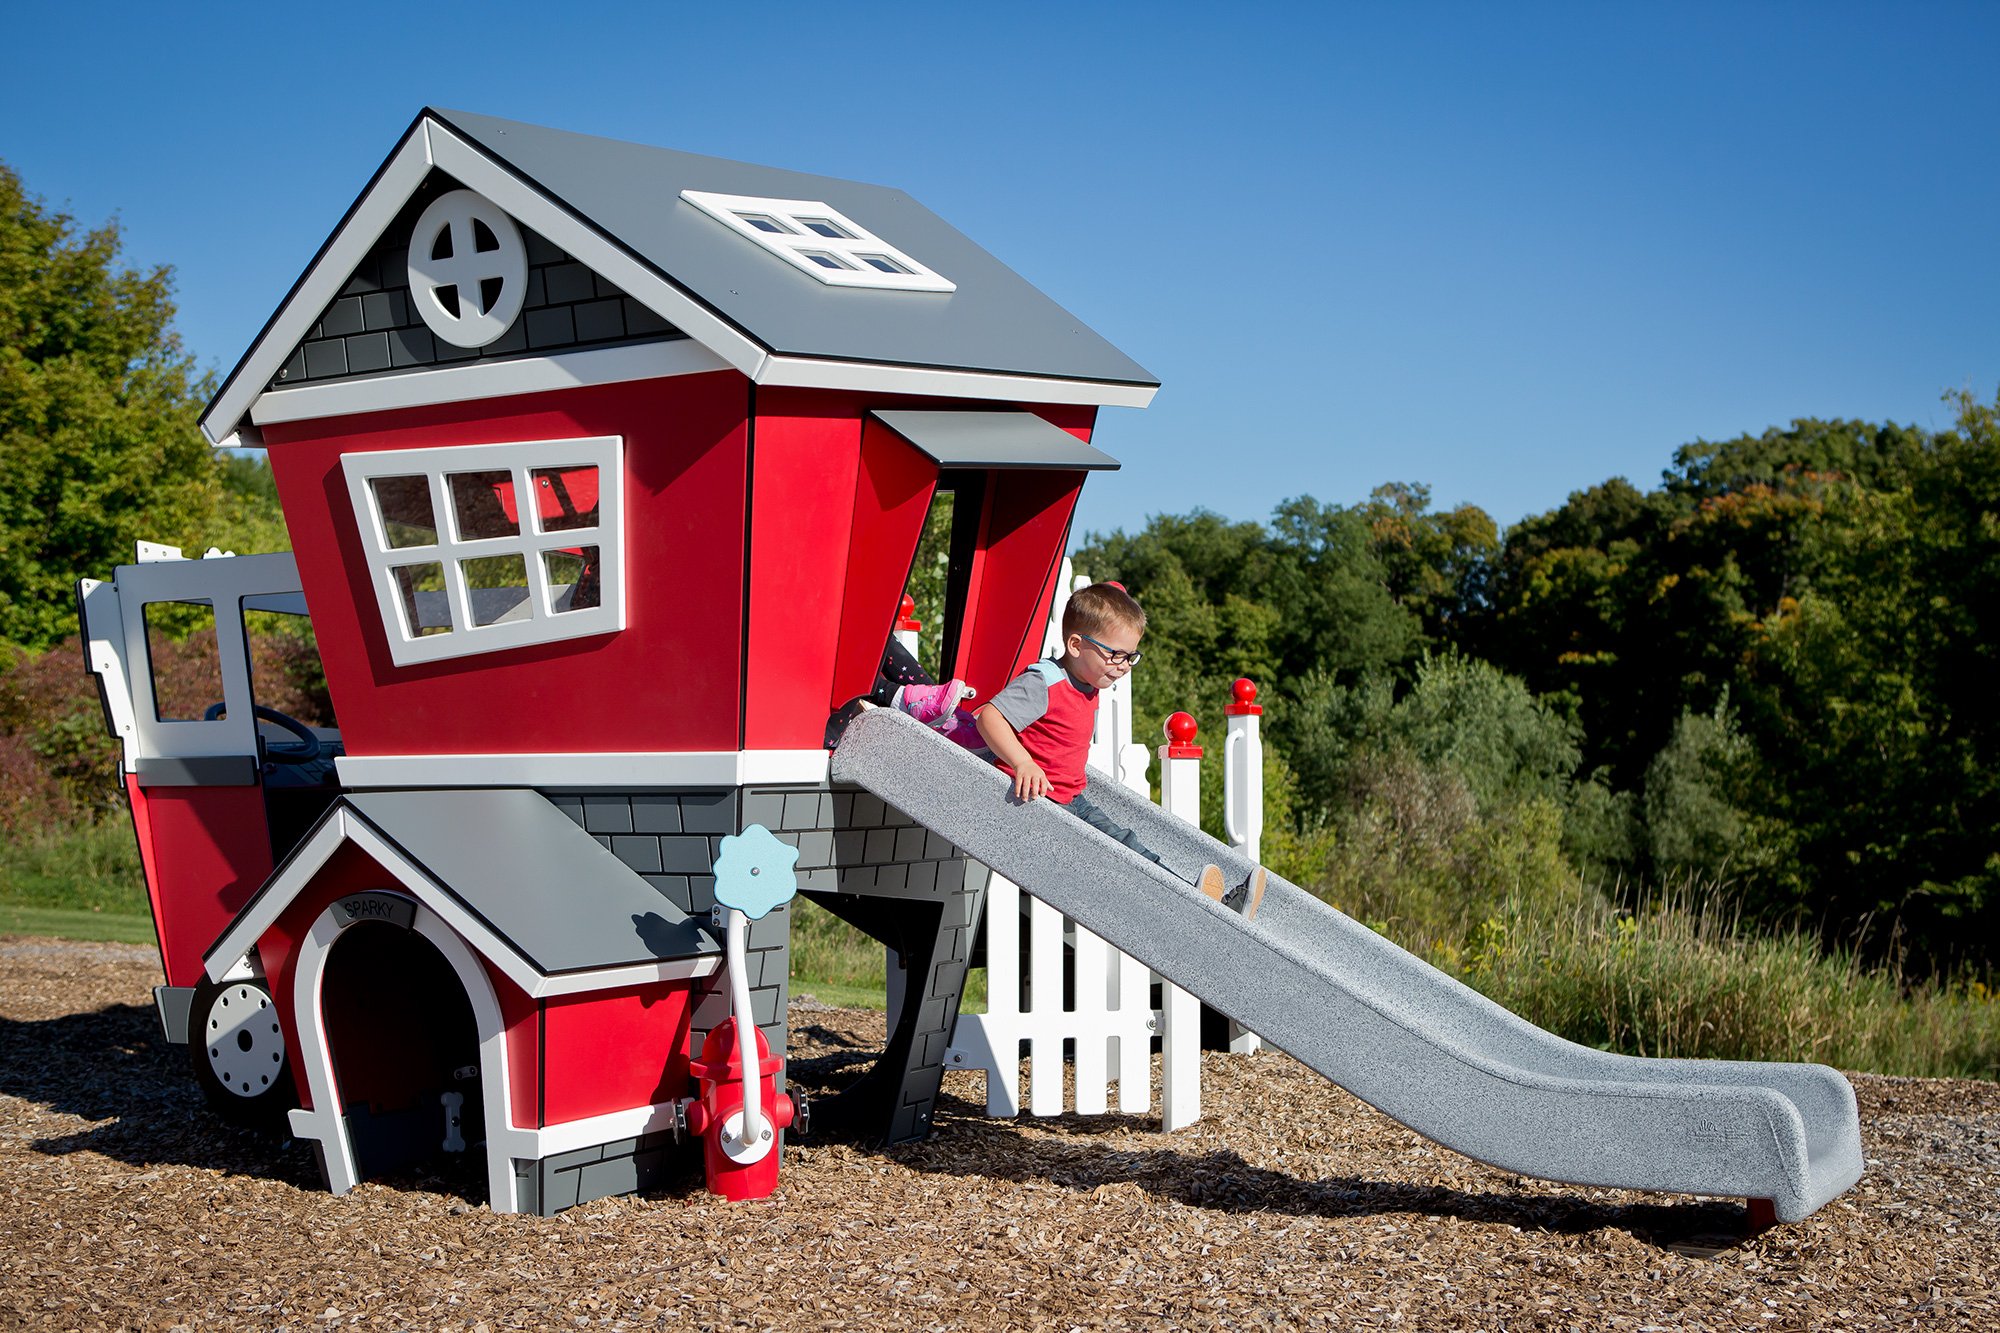 fire station playhouse outdoor